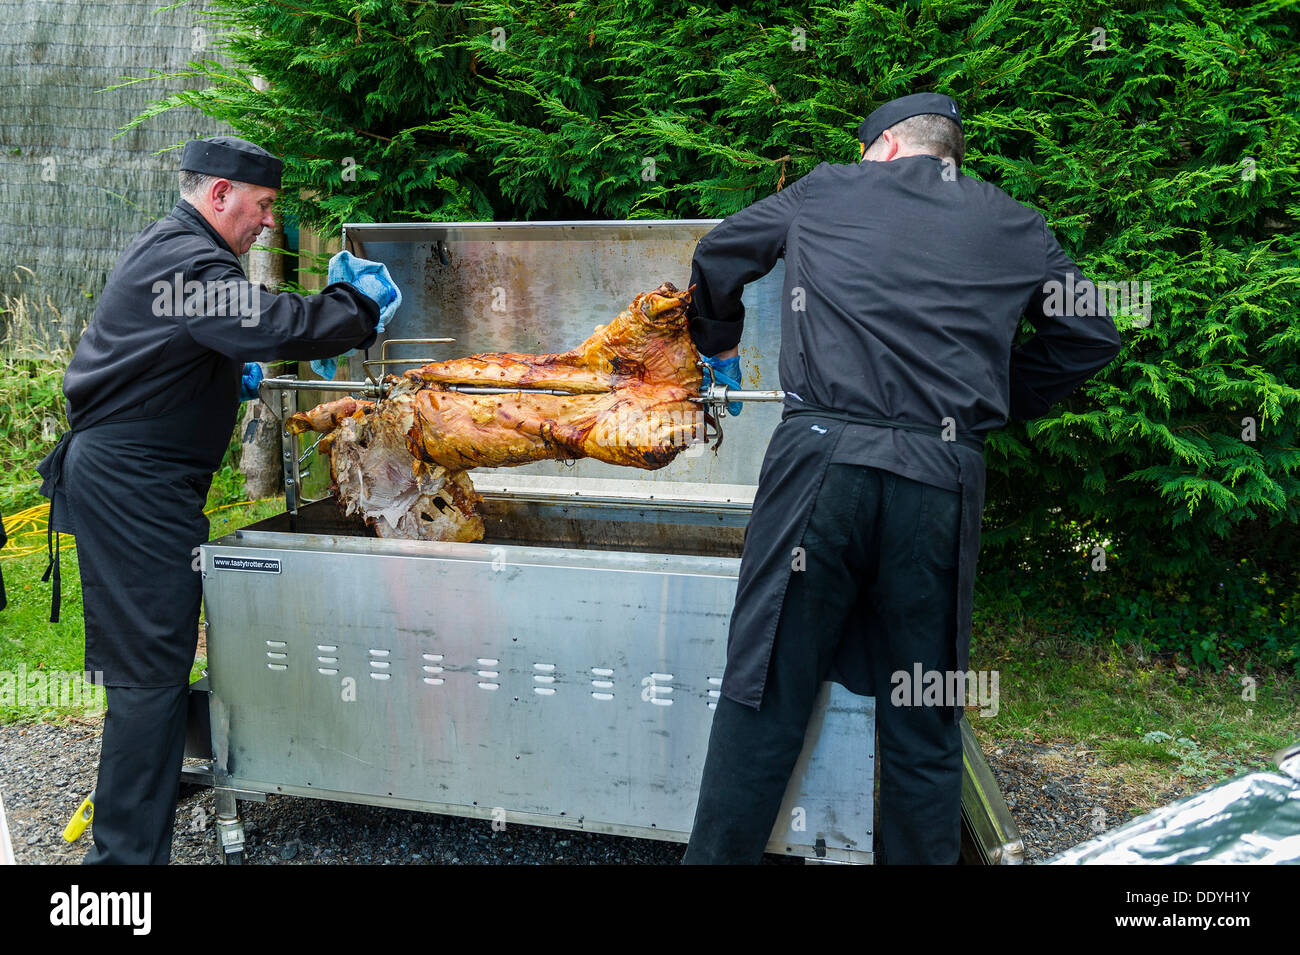 A hog roast being prepared for carving and serving. Stock Photo